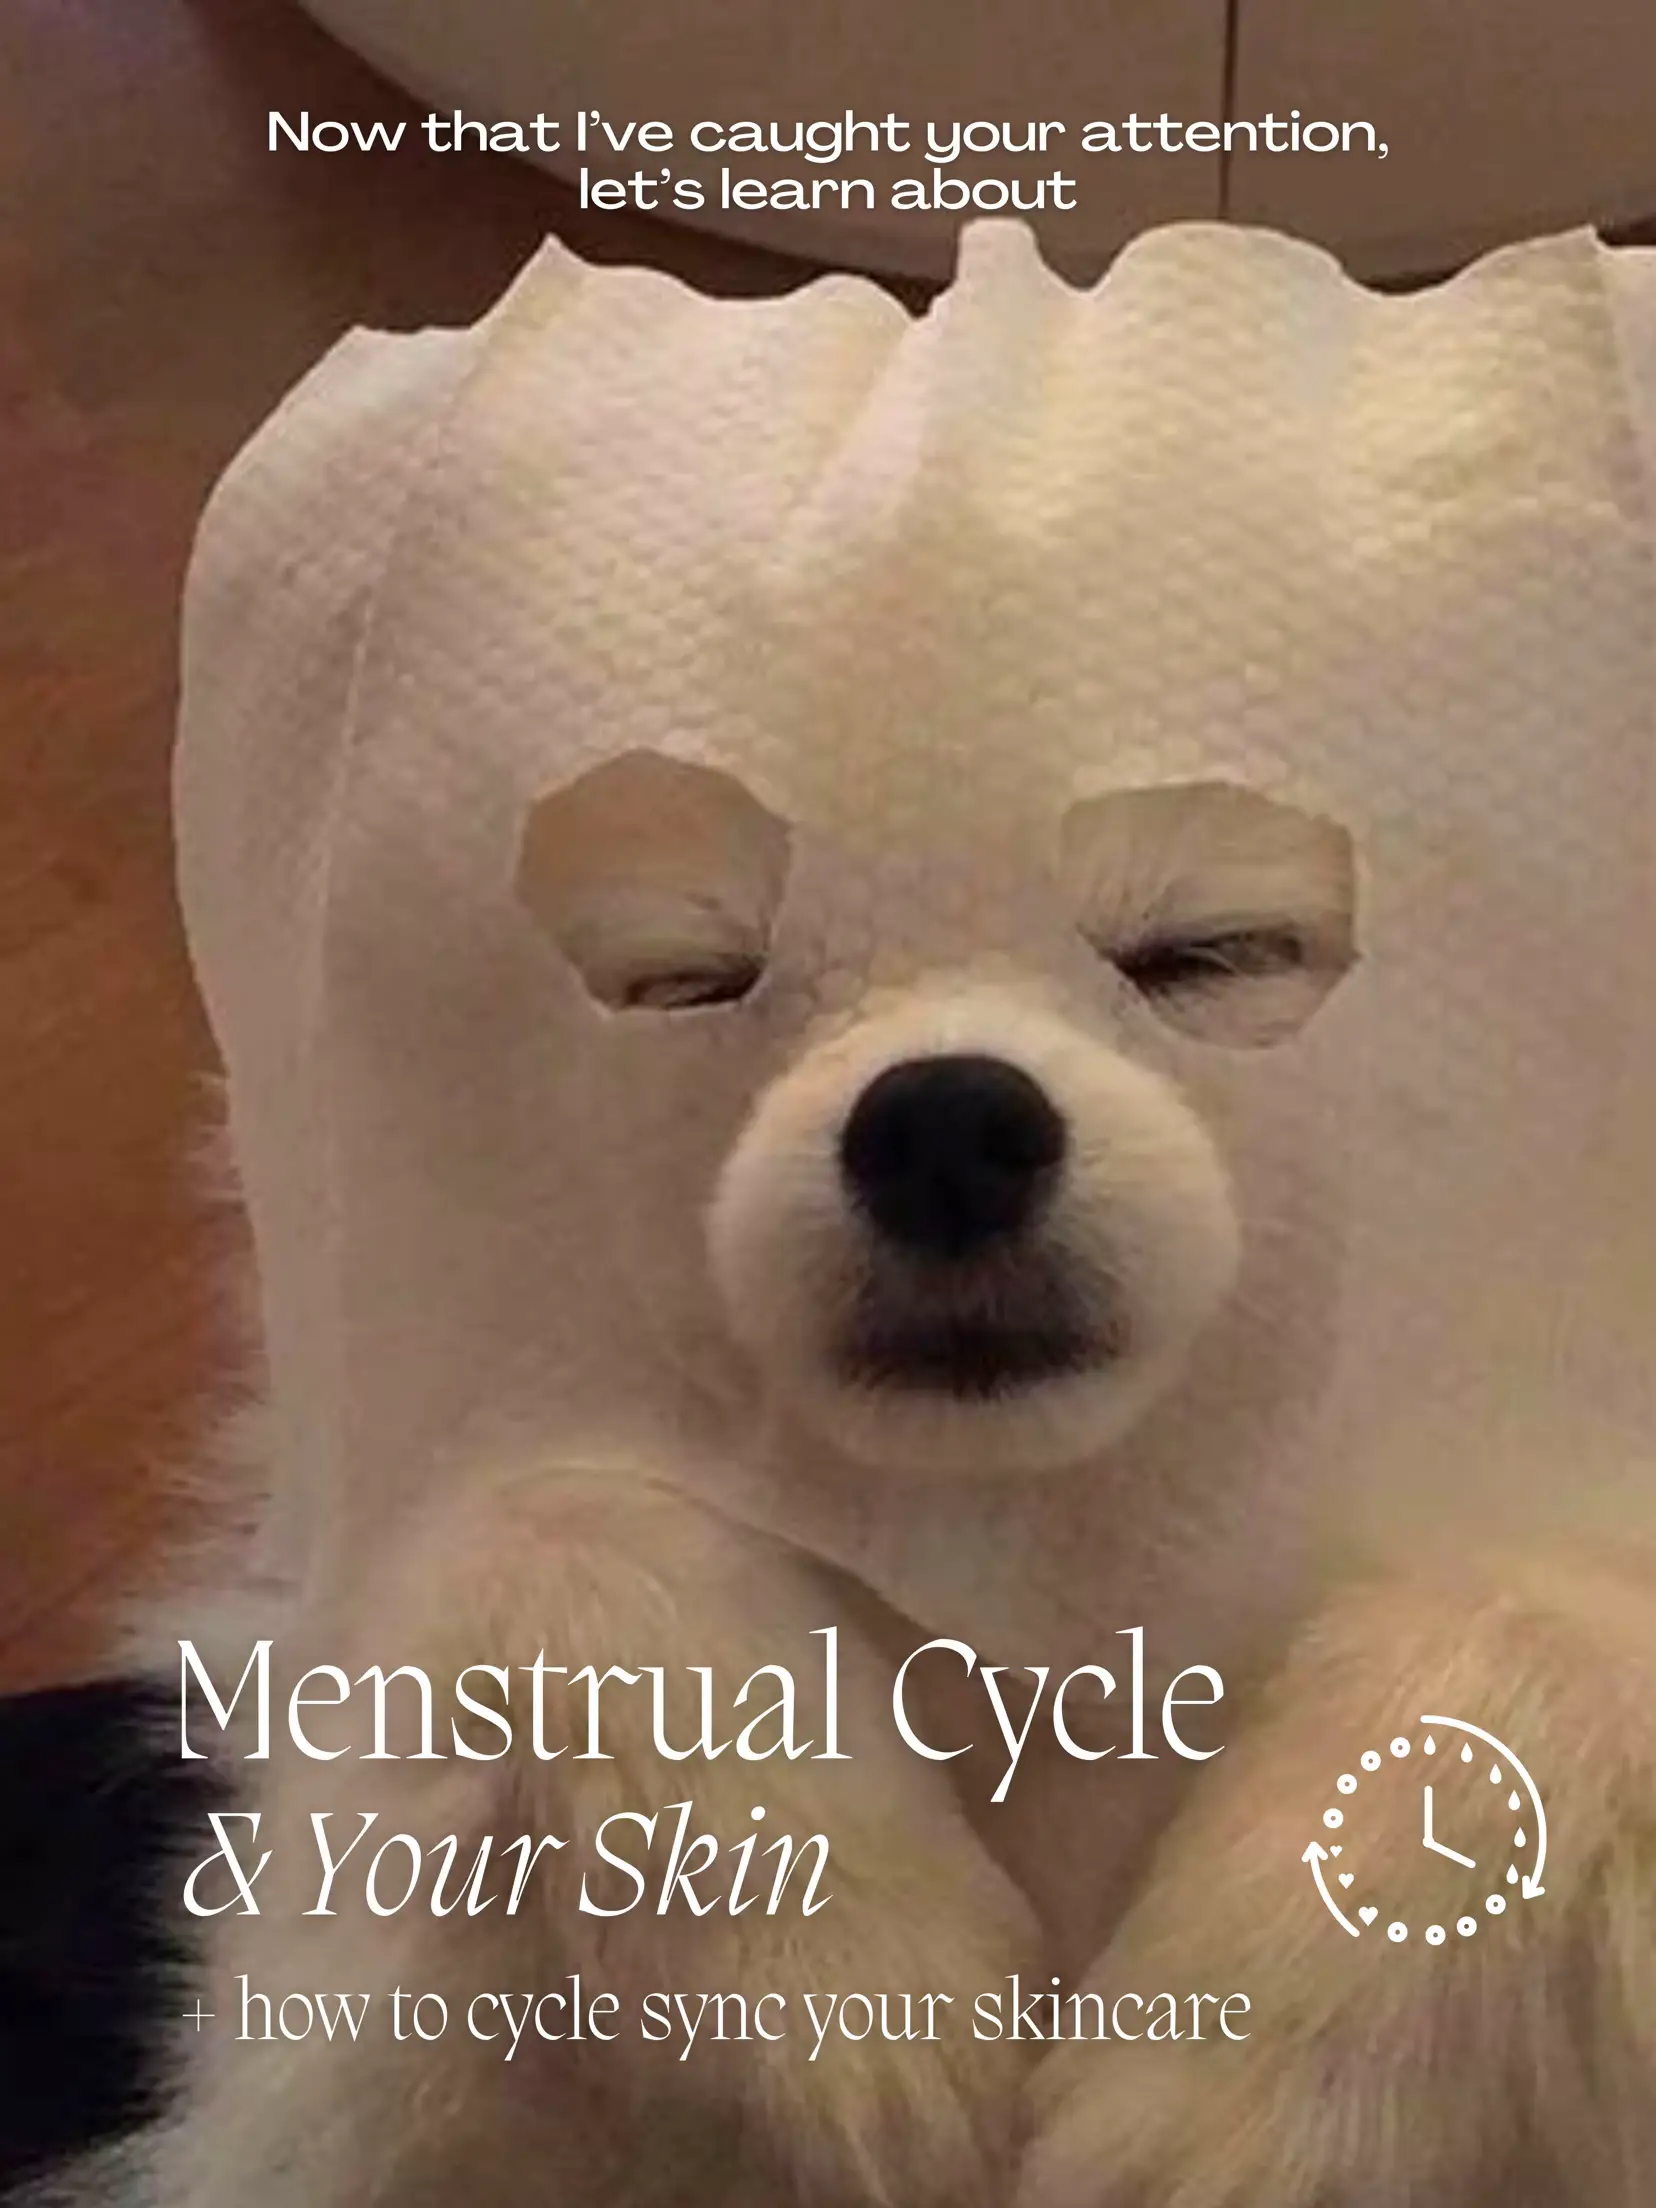 How your skin is related to your menstrual cycle 's images